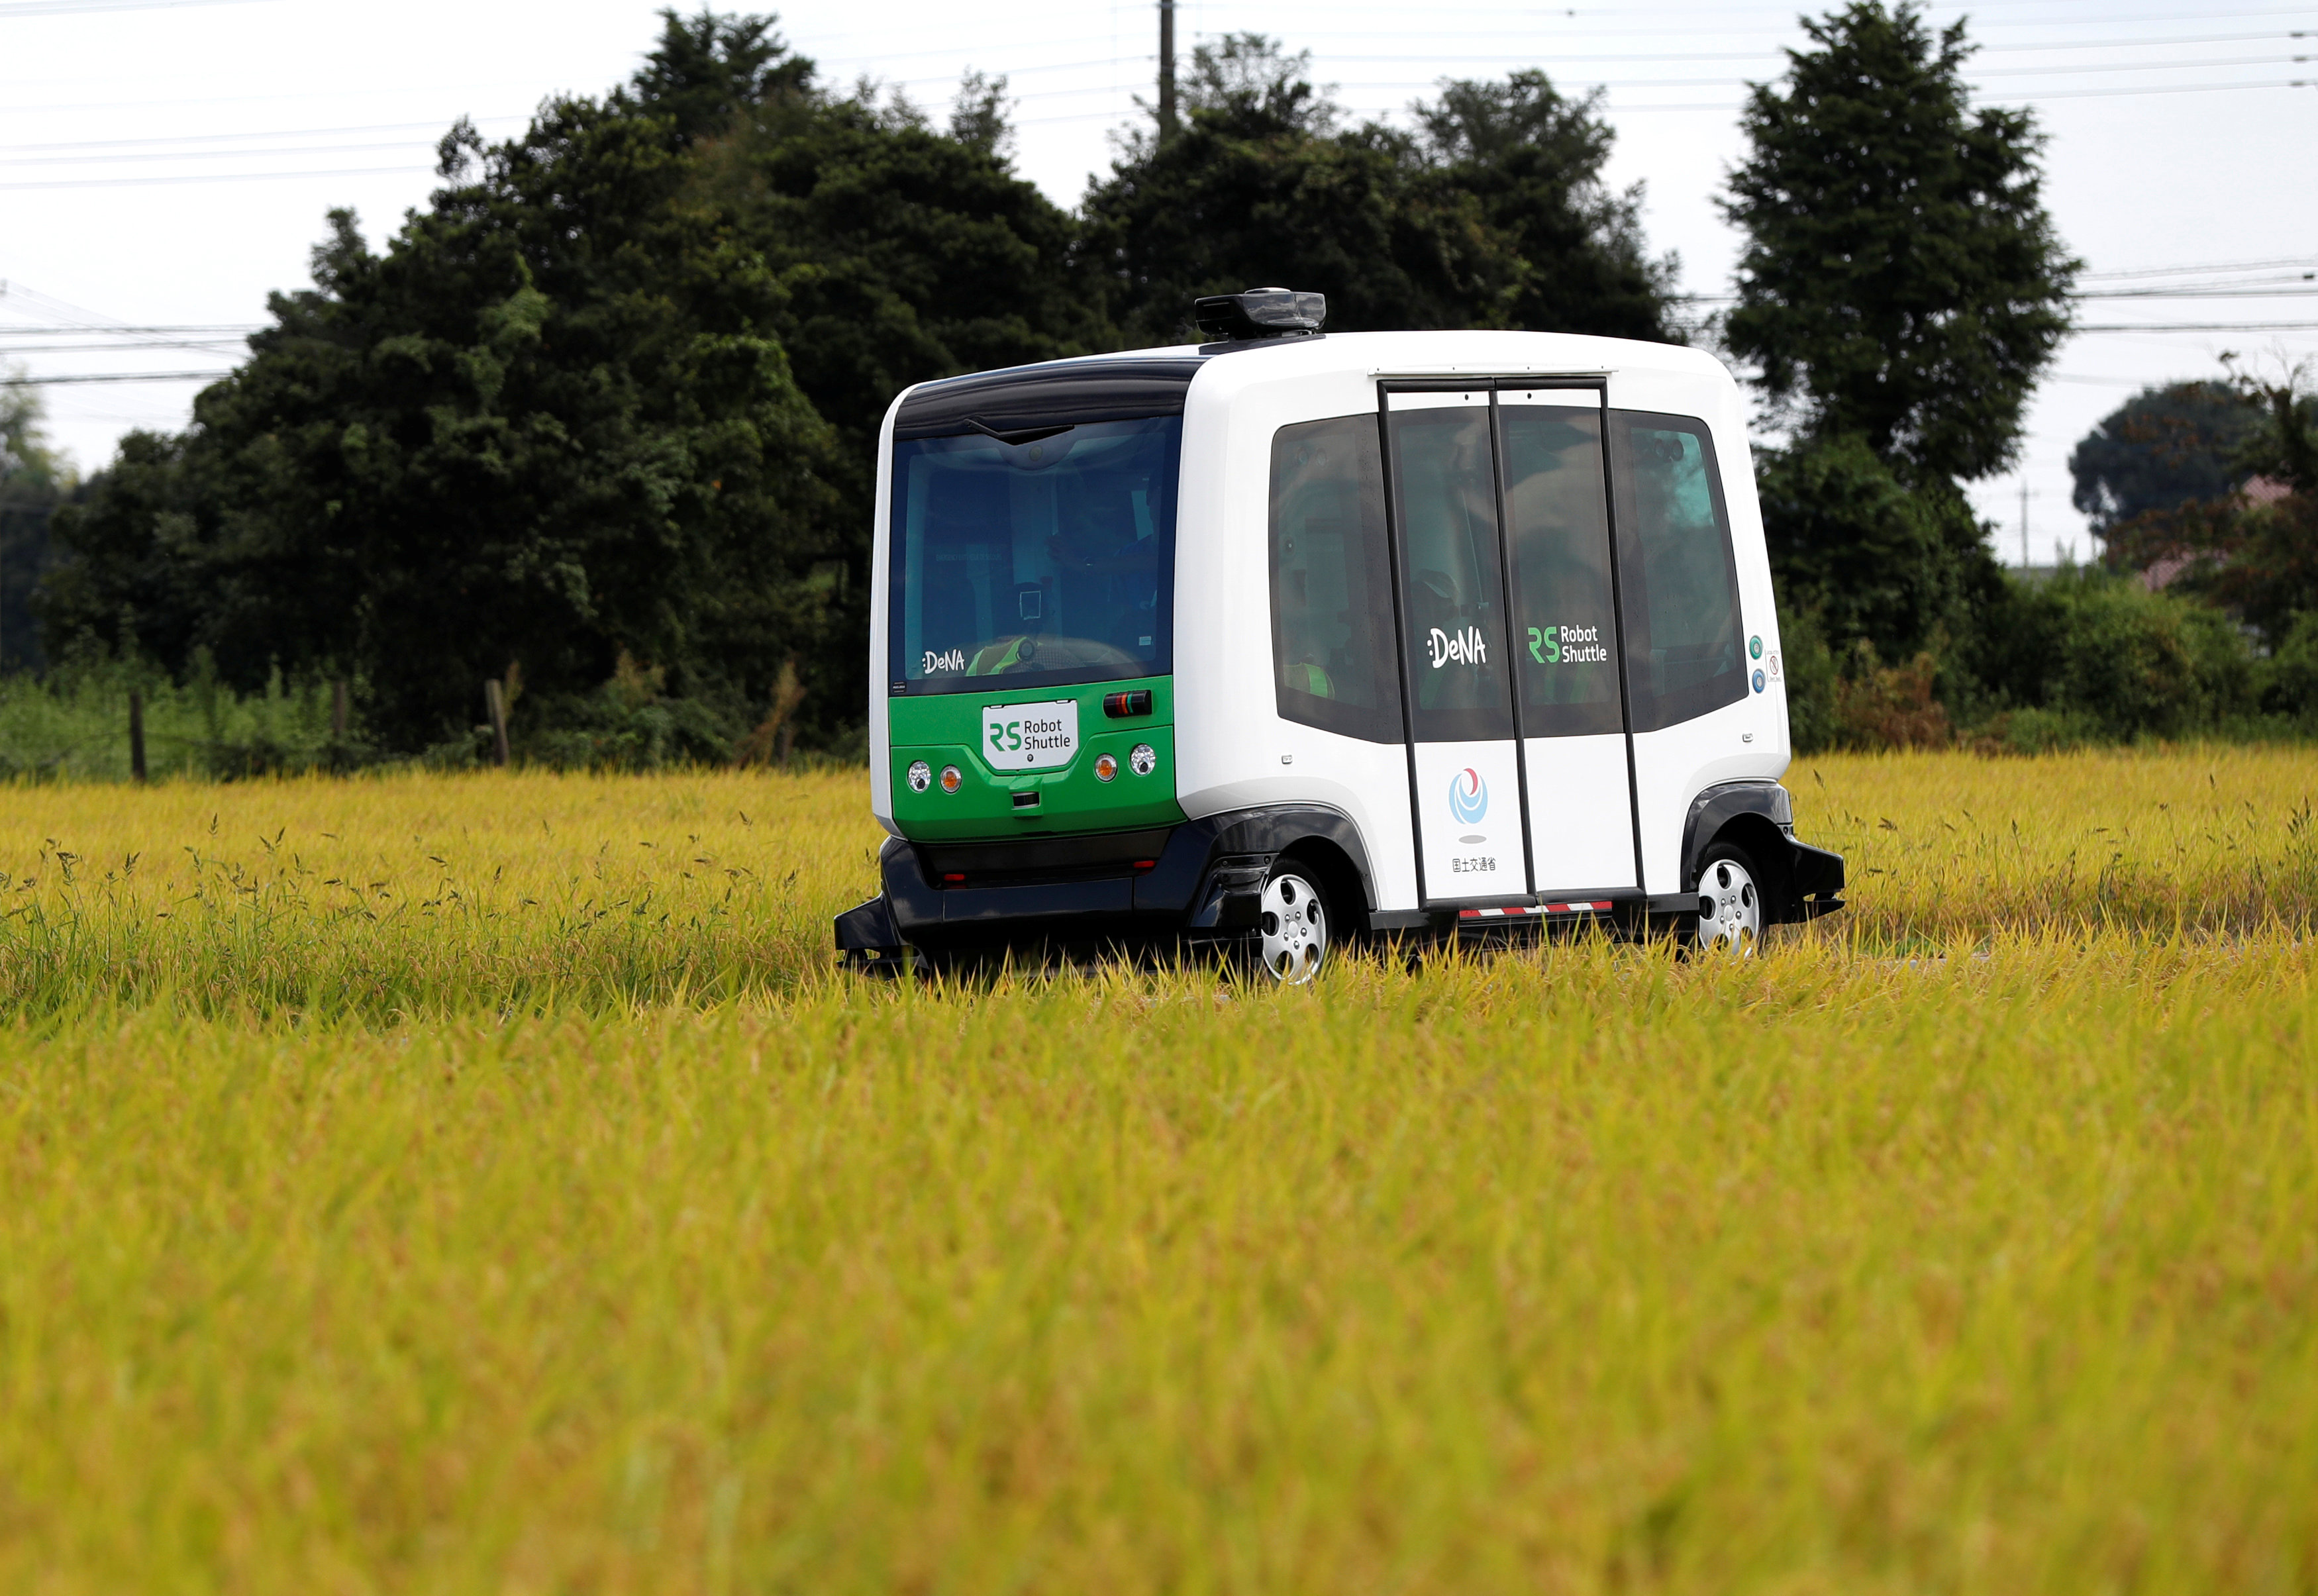 Japan starts trials of self-driving buses to keep rural elderly on the move